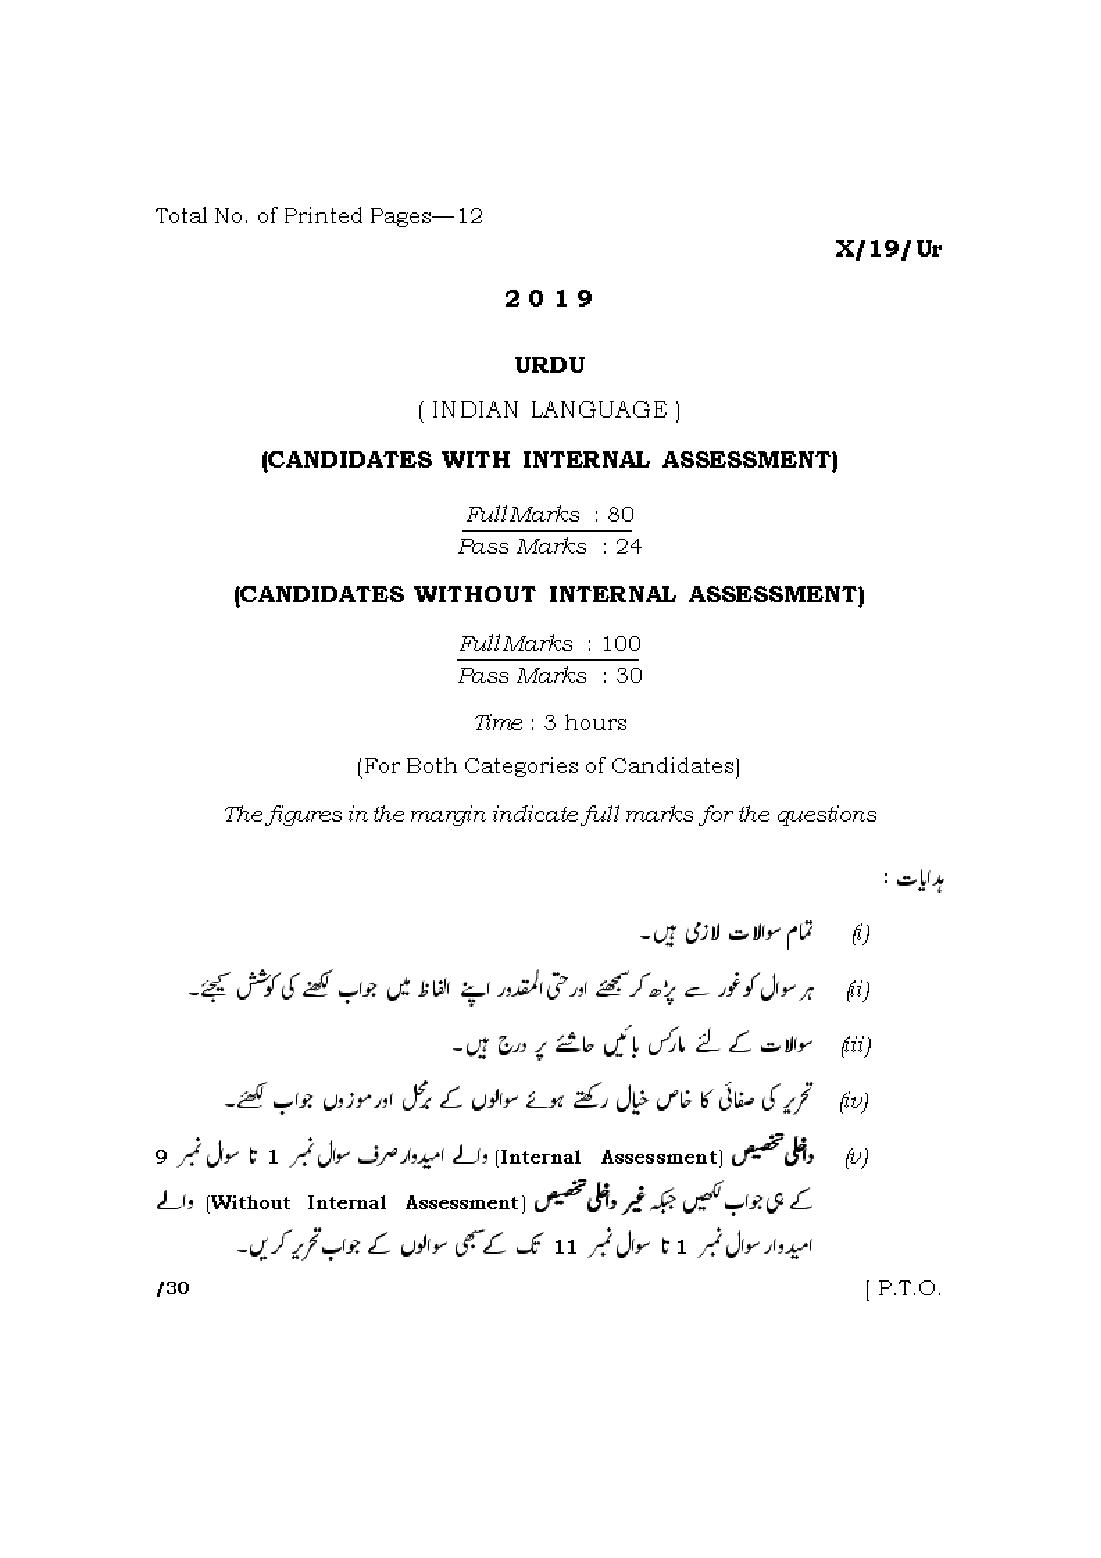 MBOSE Class 10 Question Paper 2019 for Urdu - Page 1